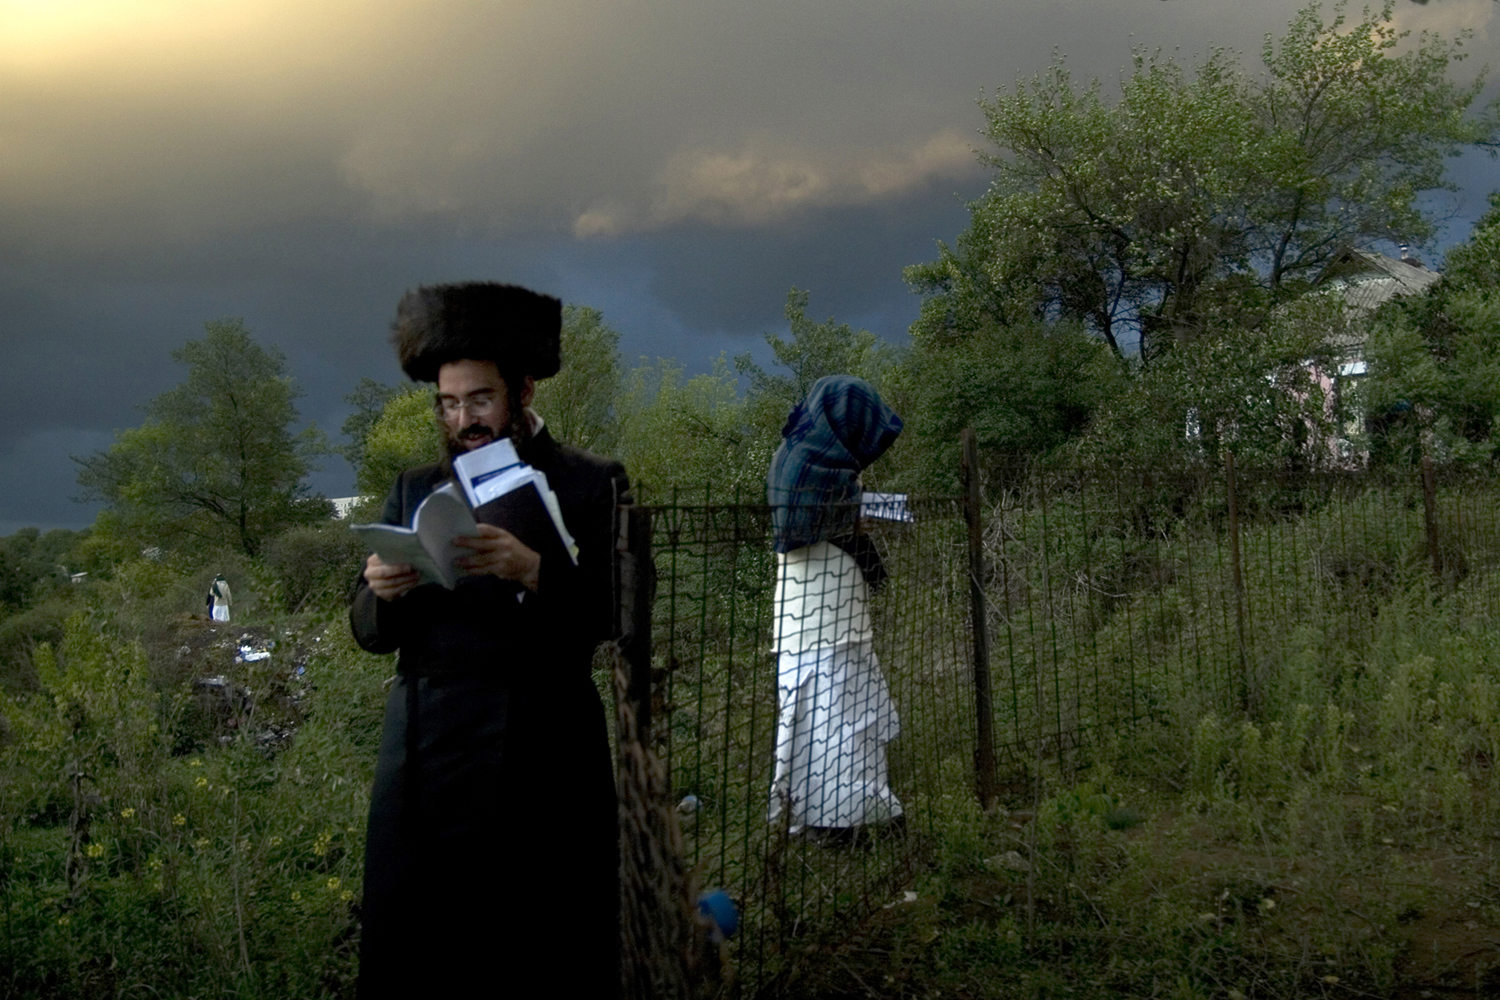 Prying Open - An oncoming storm looms above the Ukrainian sky as an Ultra-Orthodox Jewish man and woman complete their evening prayers on the eve of the Jewish holiday of Rosh Hashannah. It is rare to encounter a woman at the annual Rosh Hashannah gathering of Breslav Jewish Hasids in Uman, Ukraine. Out of the 30,000 attendants of this yearly pilgrimage, wherein Jews of all sects and nationalities come to Uman to pray at the burial-site of 17th century Rabbi Nachman, only an estimated 100 are women, myself included.